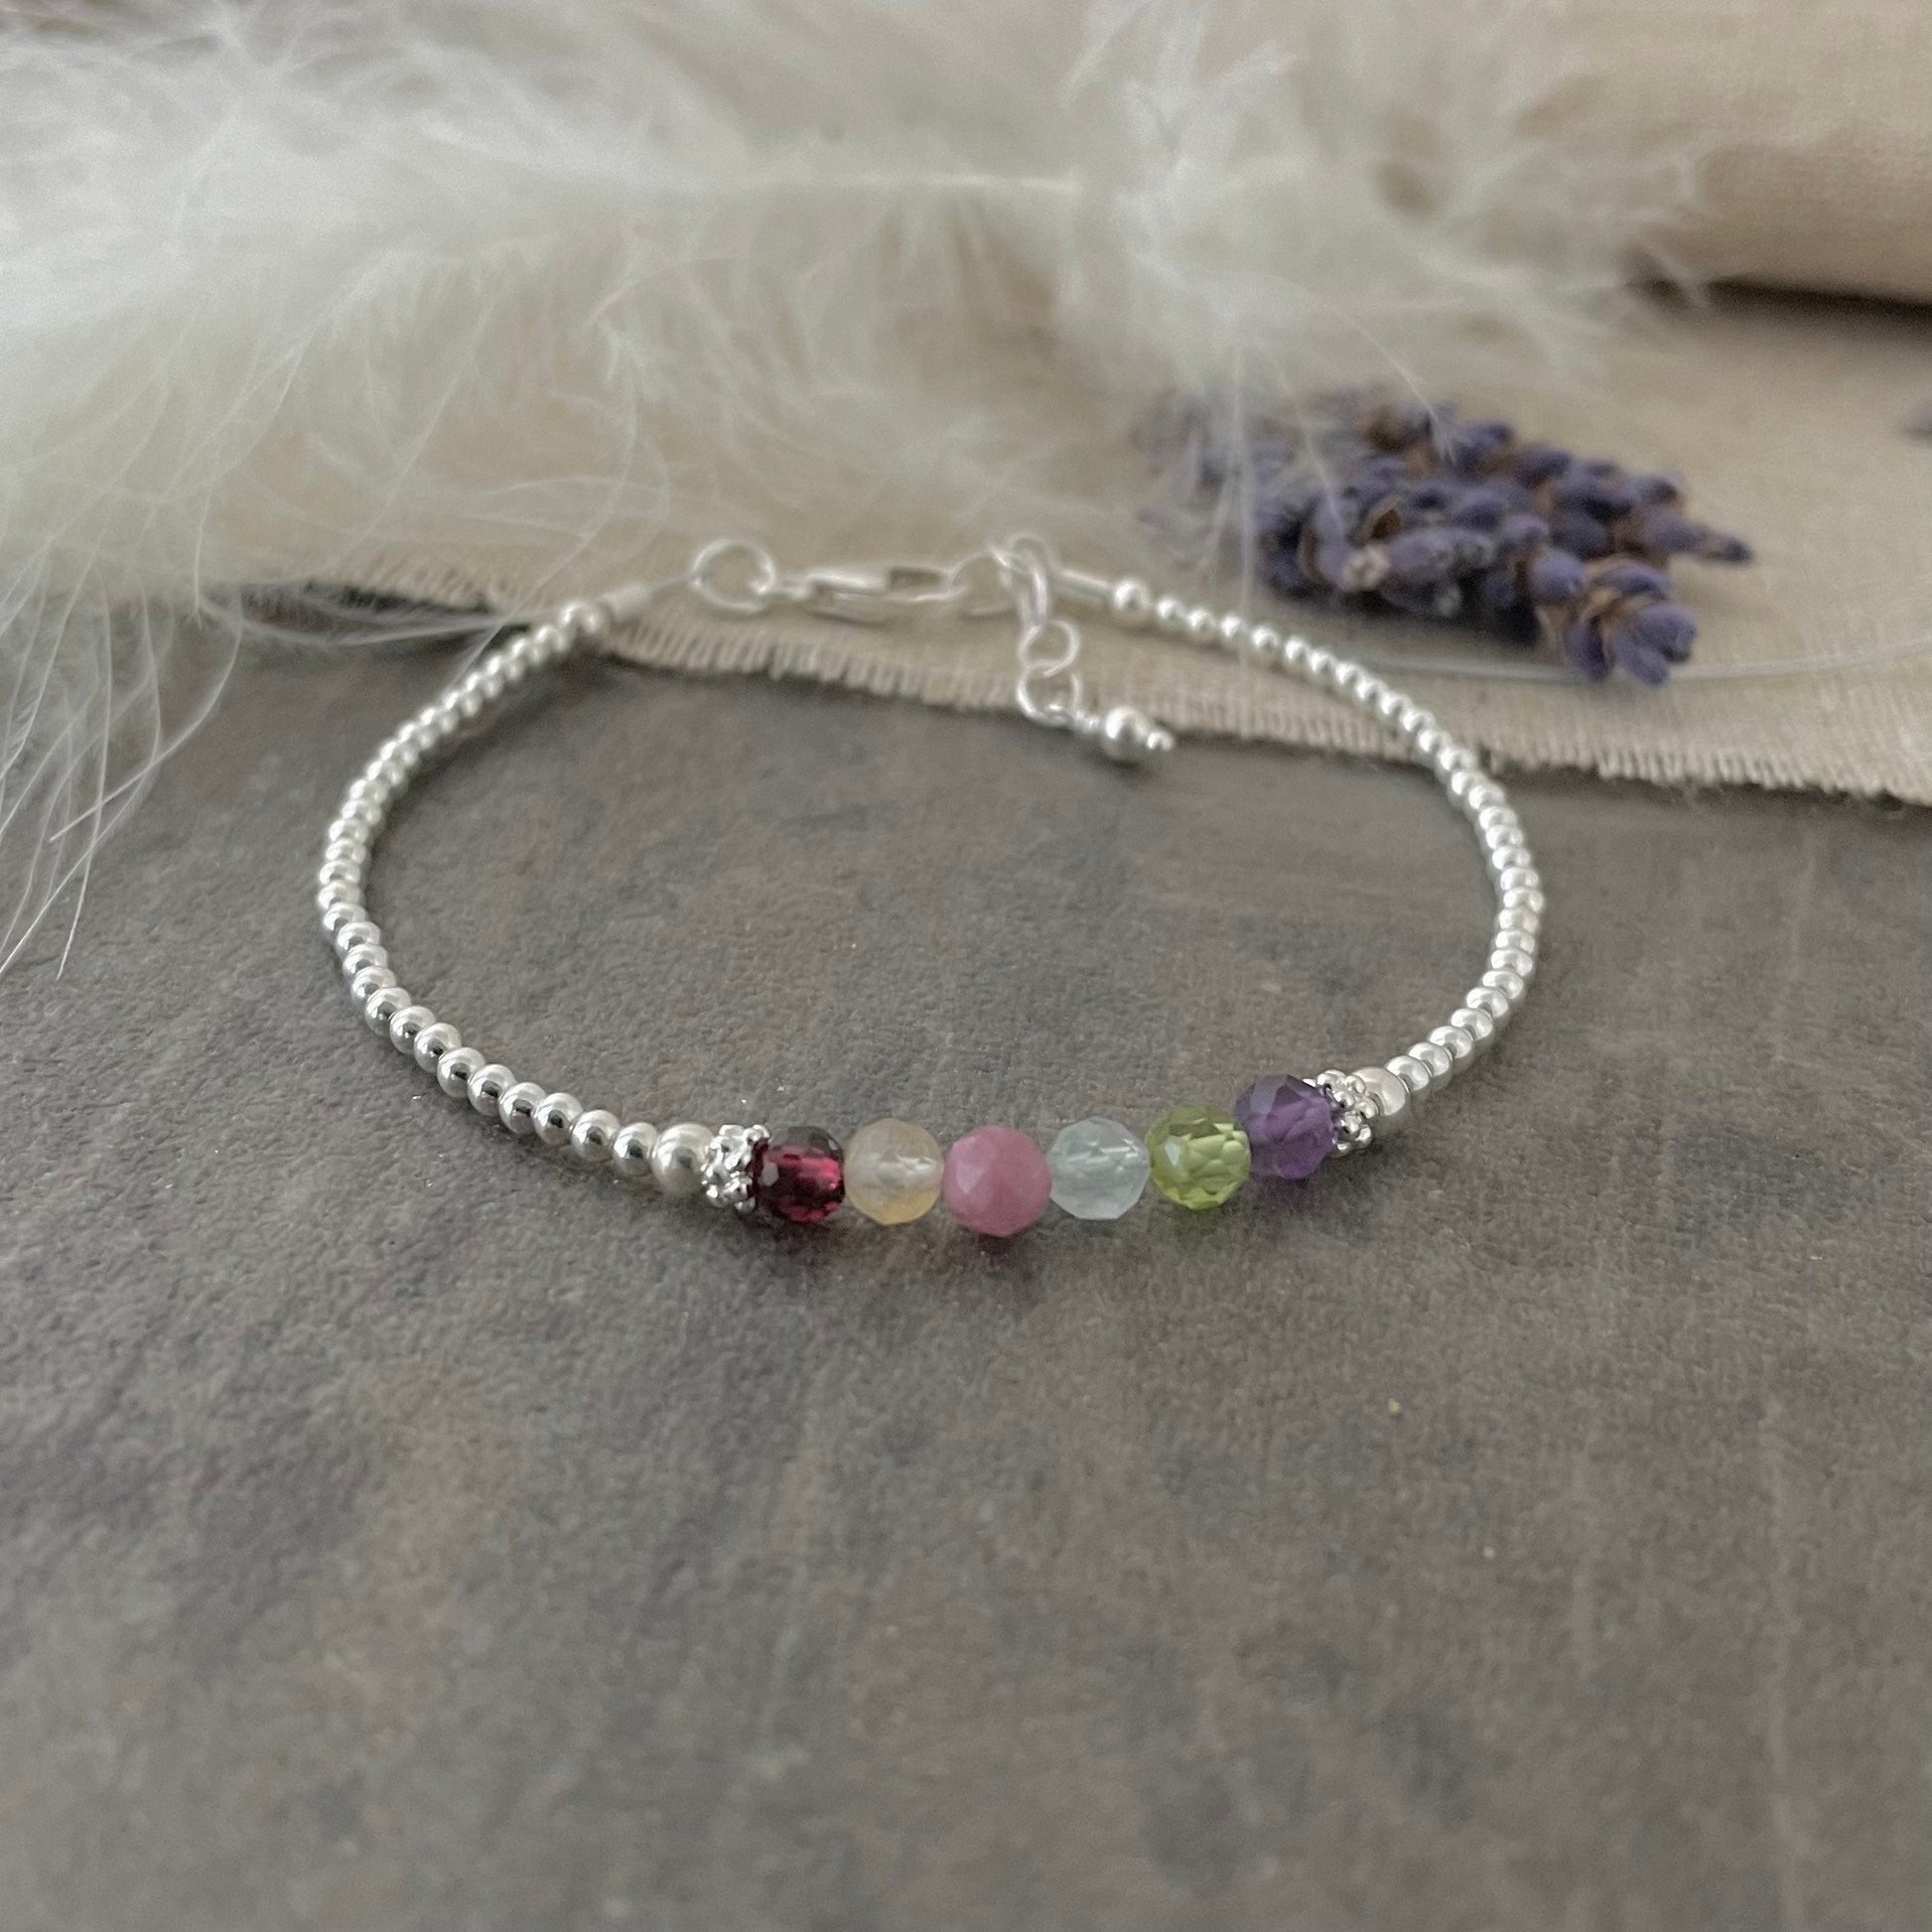 Mothers Birthstone Bracelet, Family Birthstone Jewellery for Mothers Day in Sterling Silver nft